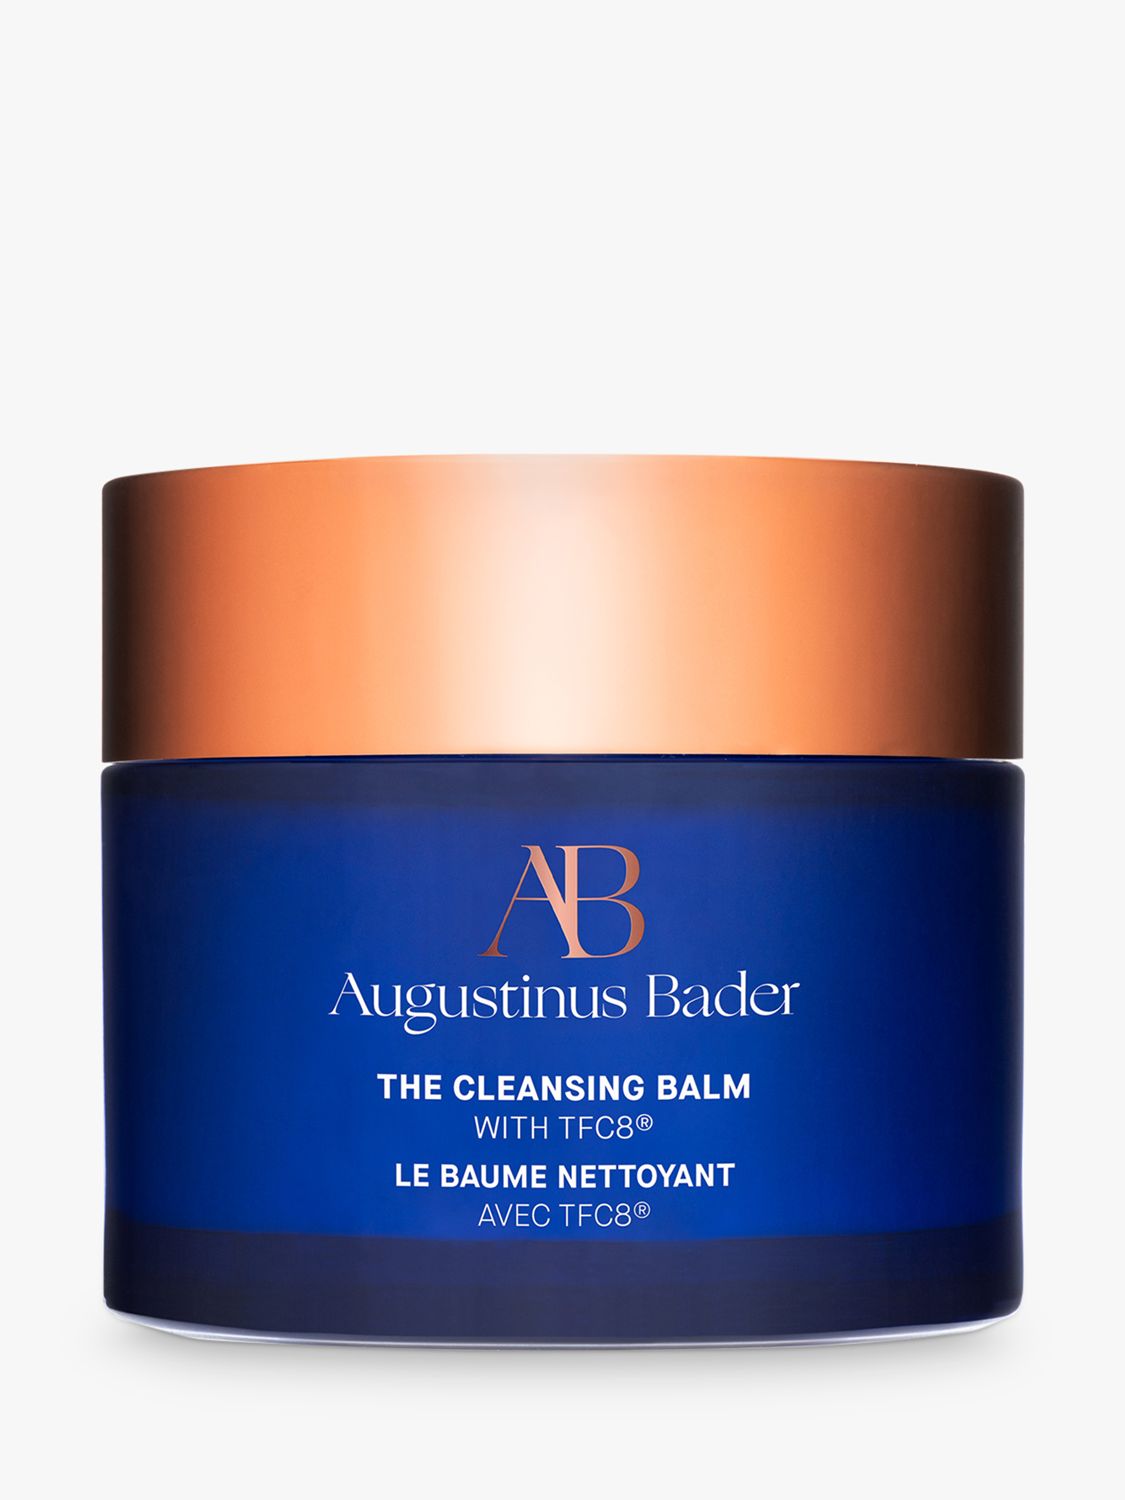 Augustinus Bader The Cleansing Balm, 90g 1